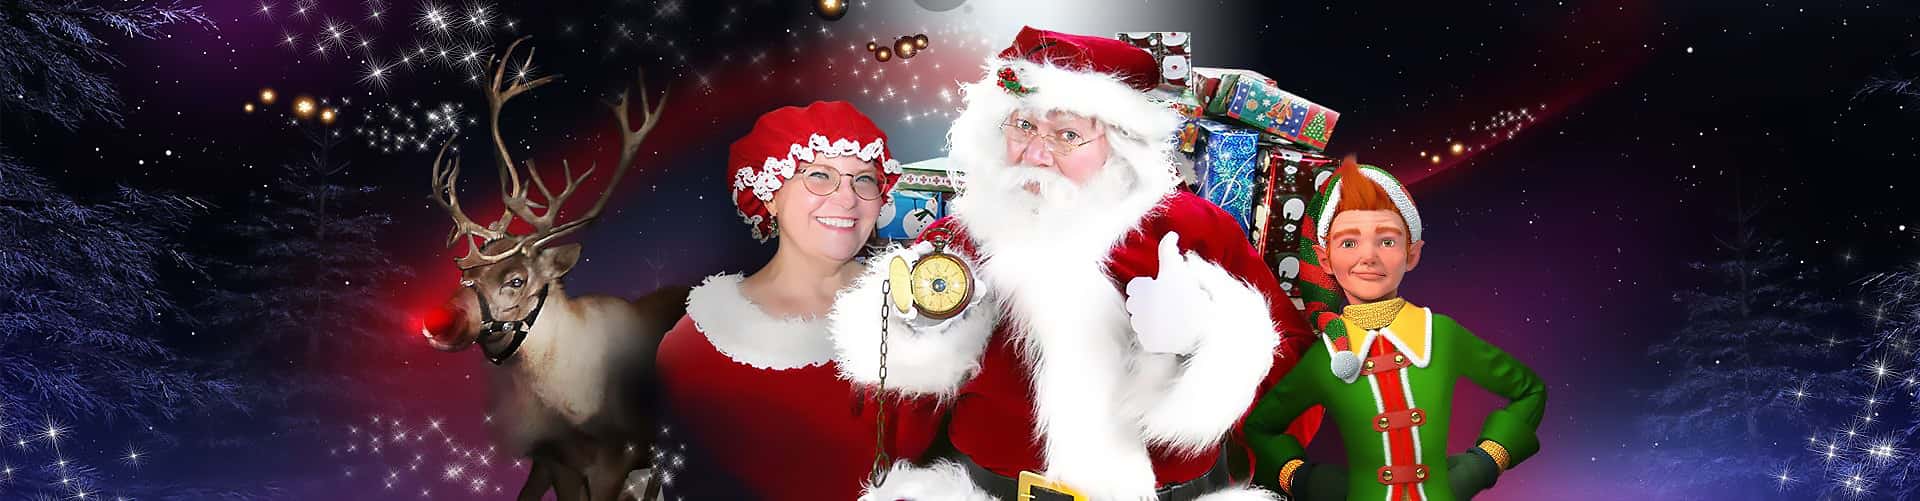 photo of Santa Claus, Mrs. Claus and reindeer